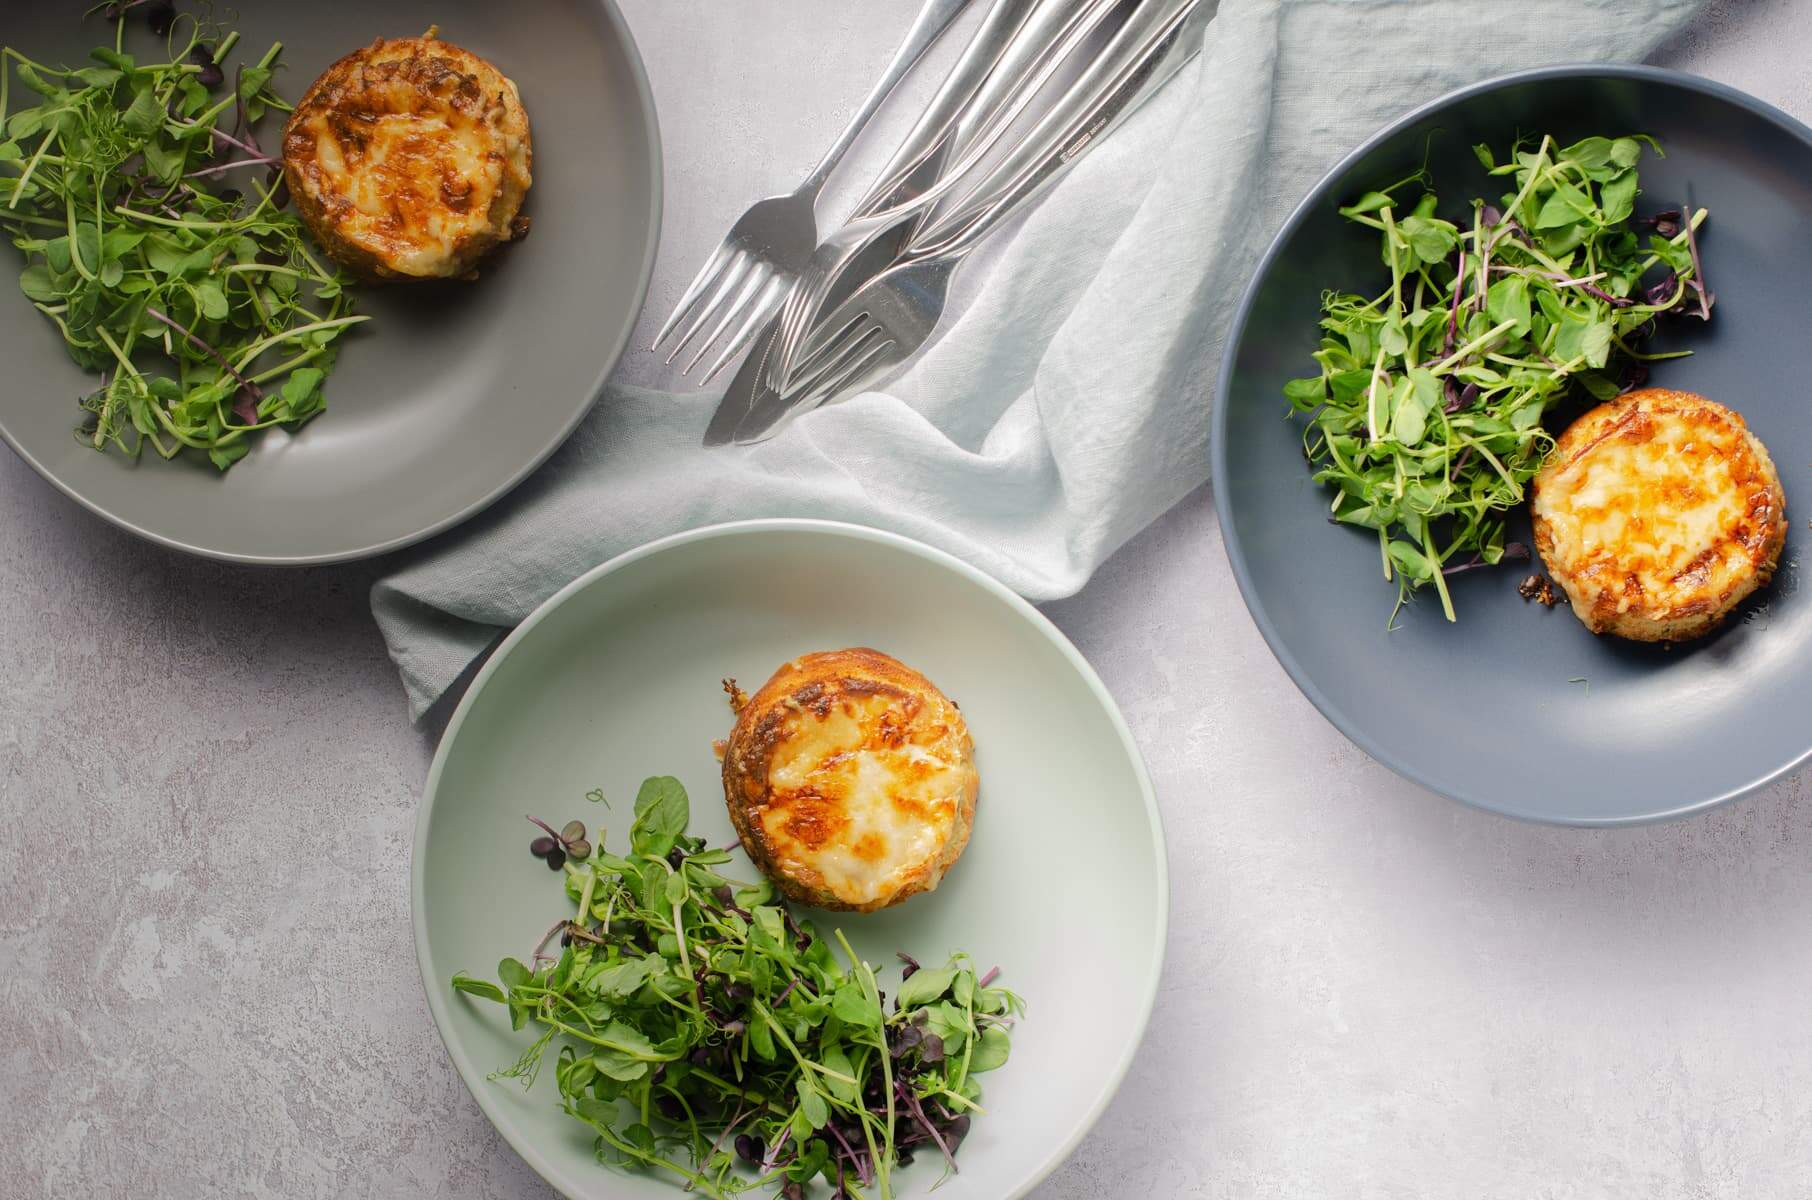 Looking above a table set for 3 plates of twice baked cheese souffles and green salads on plates of green, blue and grey and a napkin with cutlery.